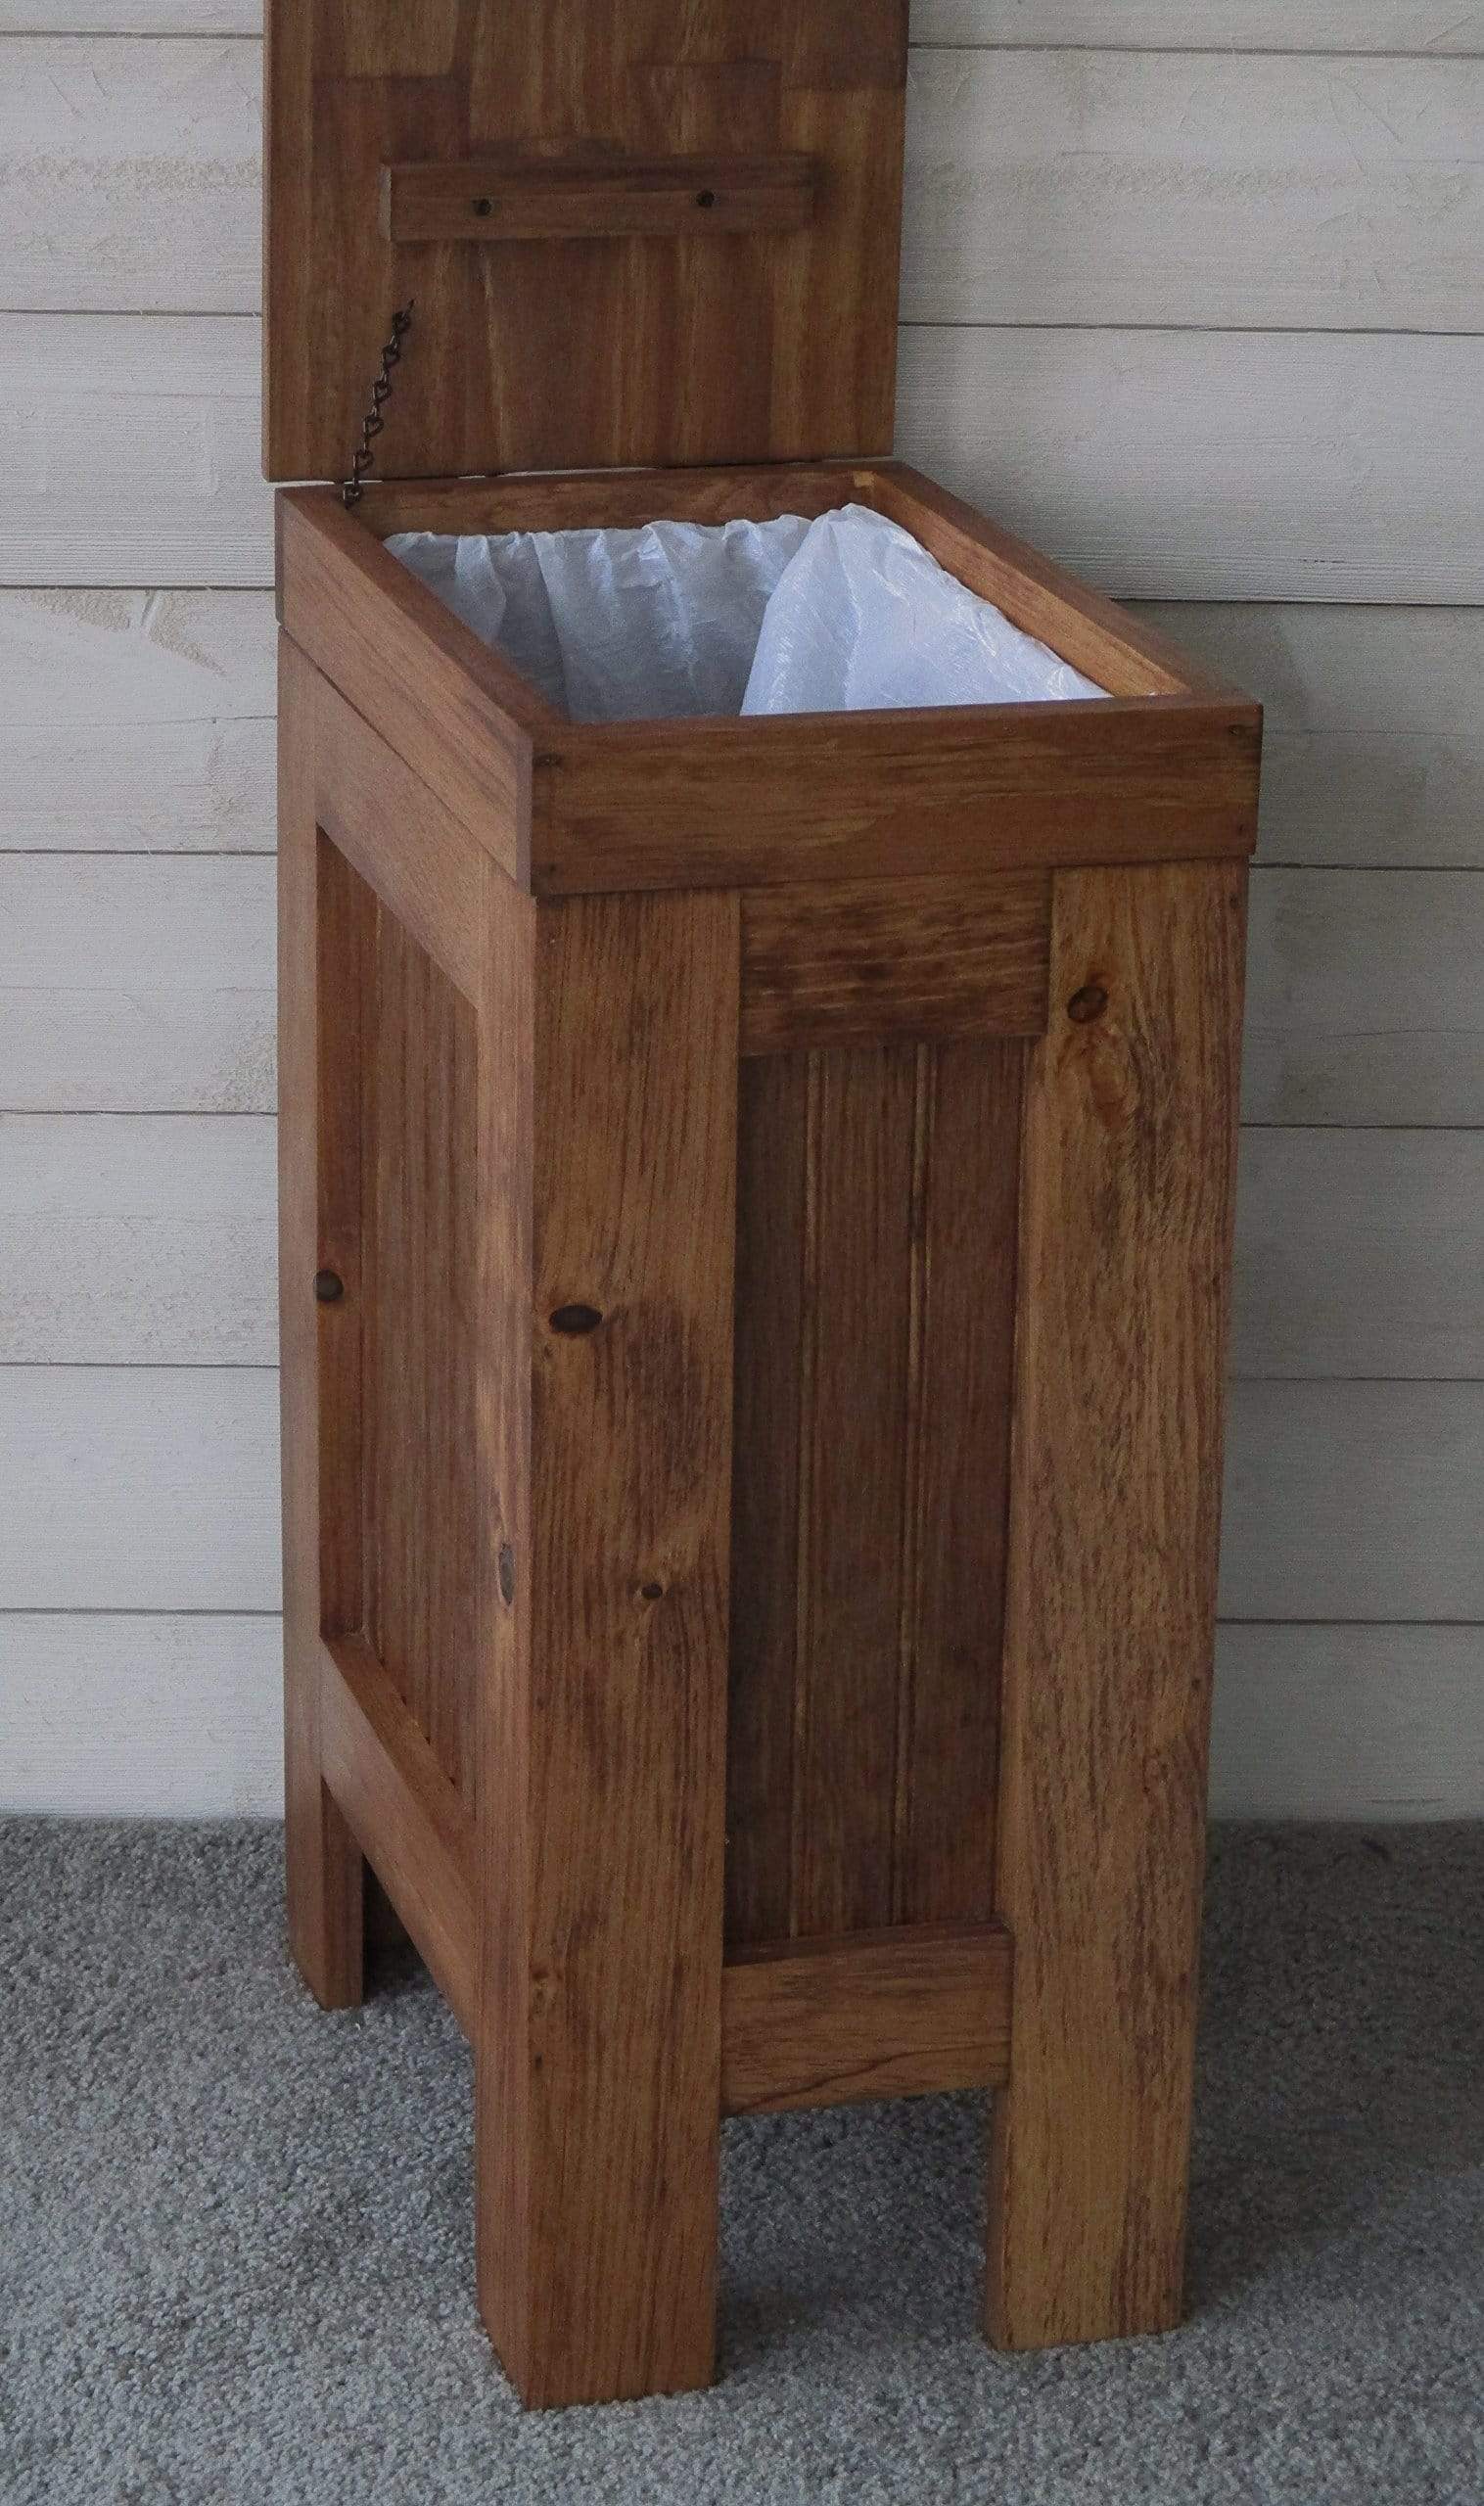 Select nice buffalowood shop rustic wood trash bin kitchen trash can wood trash can dog food storage container 13 gallon recycle bin early american stain with metal knob